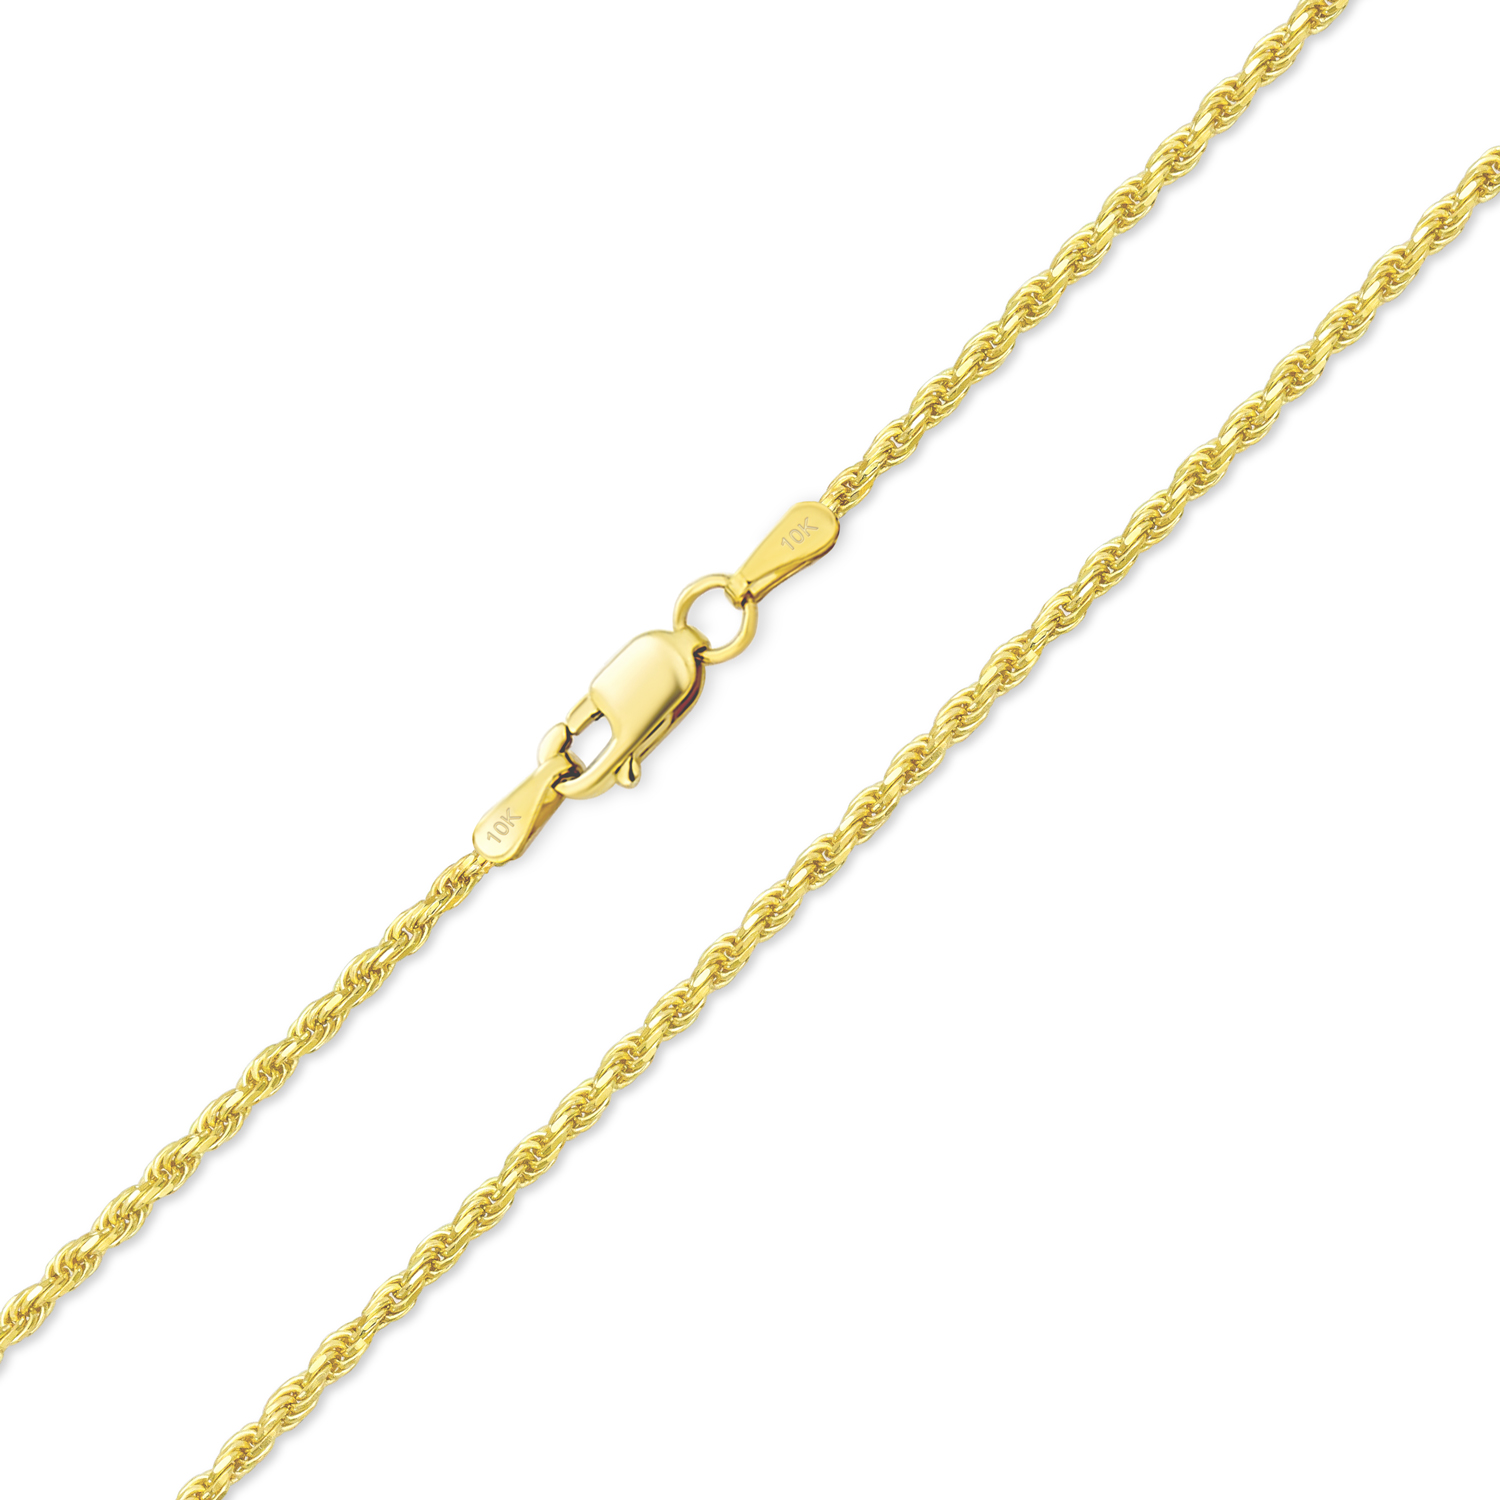 bling jewelry Real Yellow 10K Gold Cable Rope Chain 3MM Necklace 16,18 20 22 24"